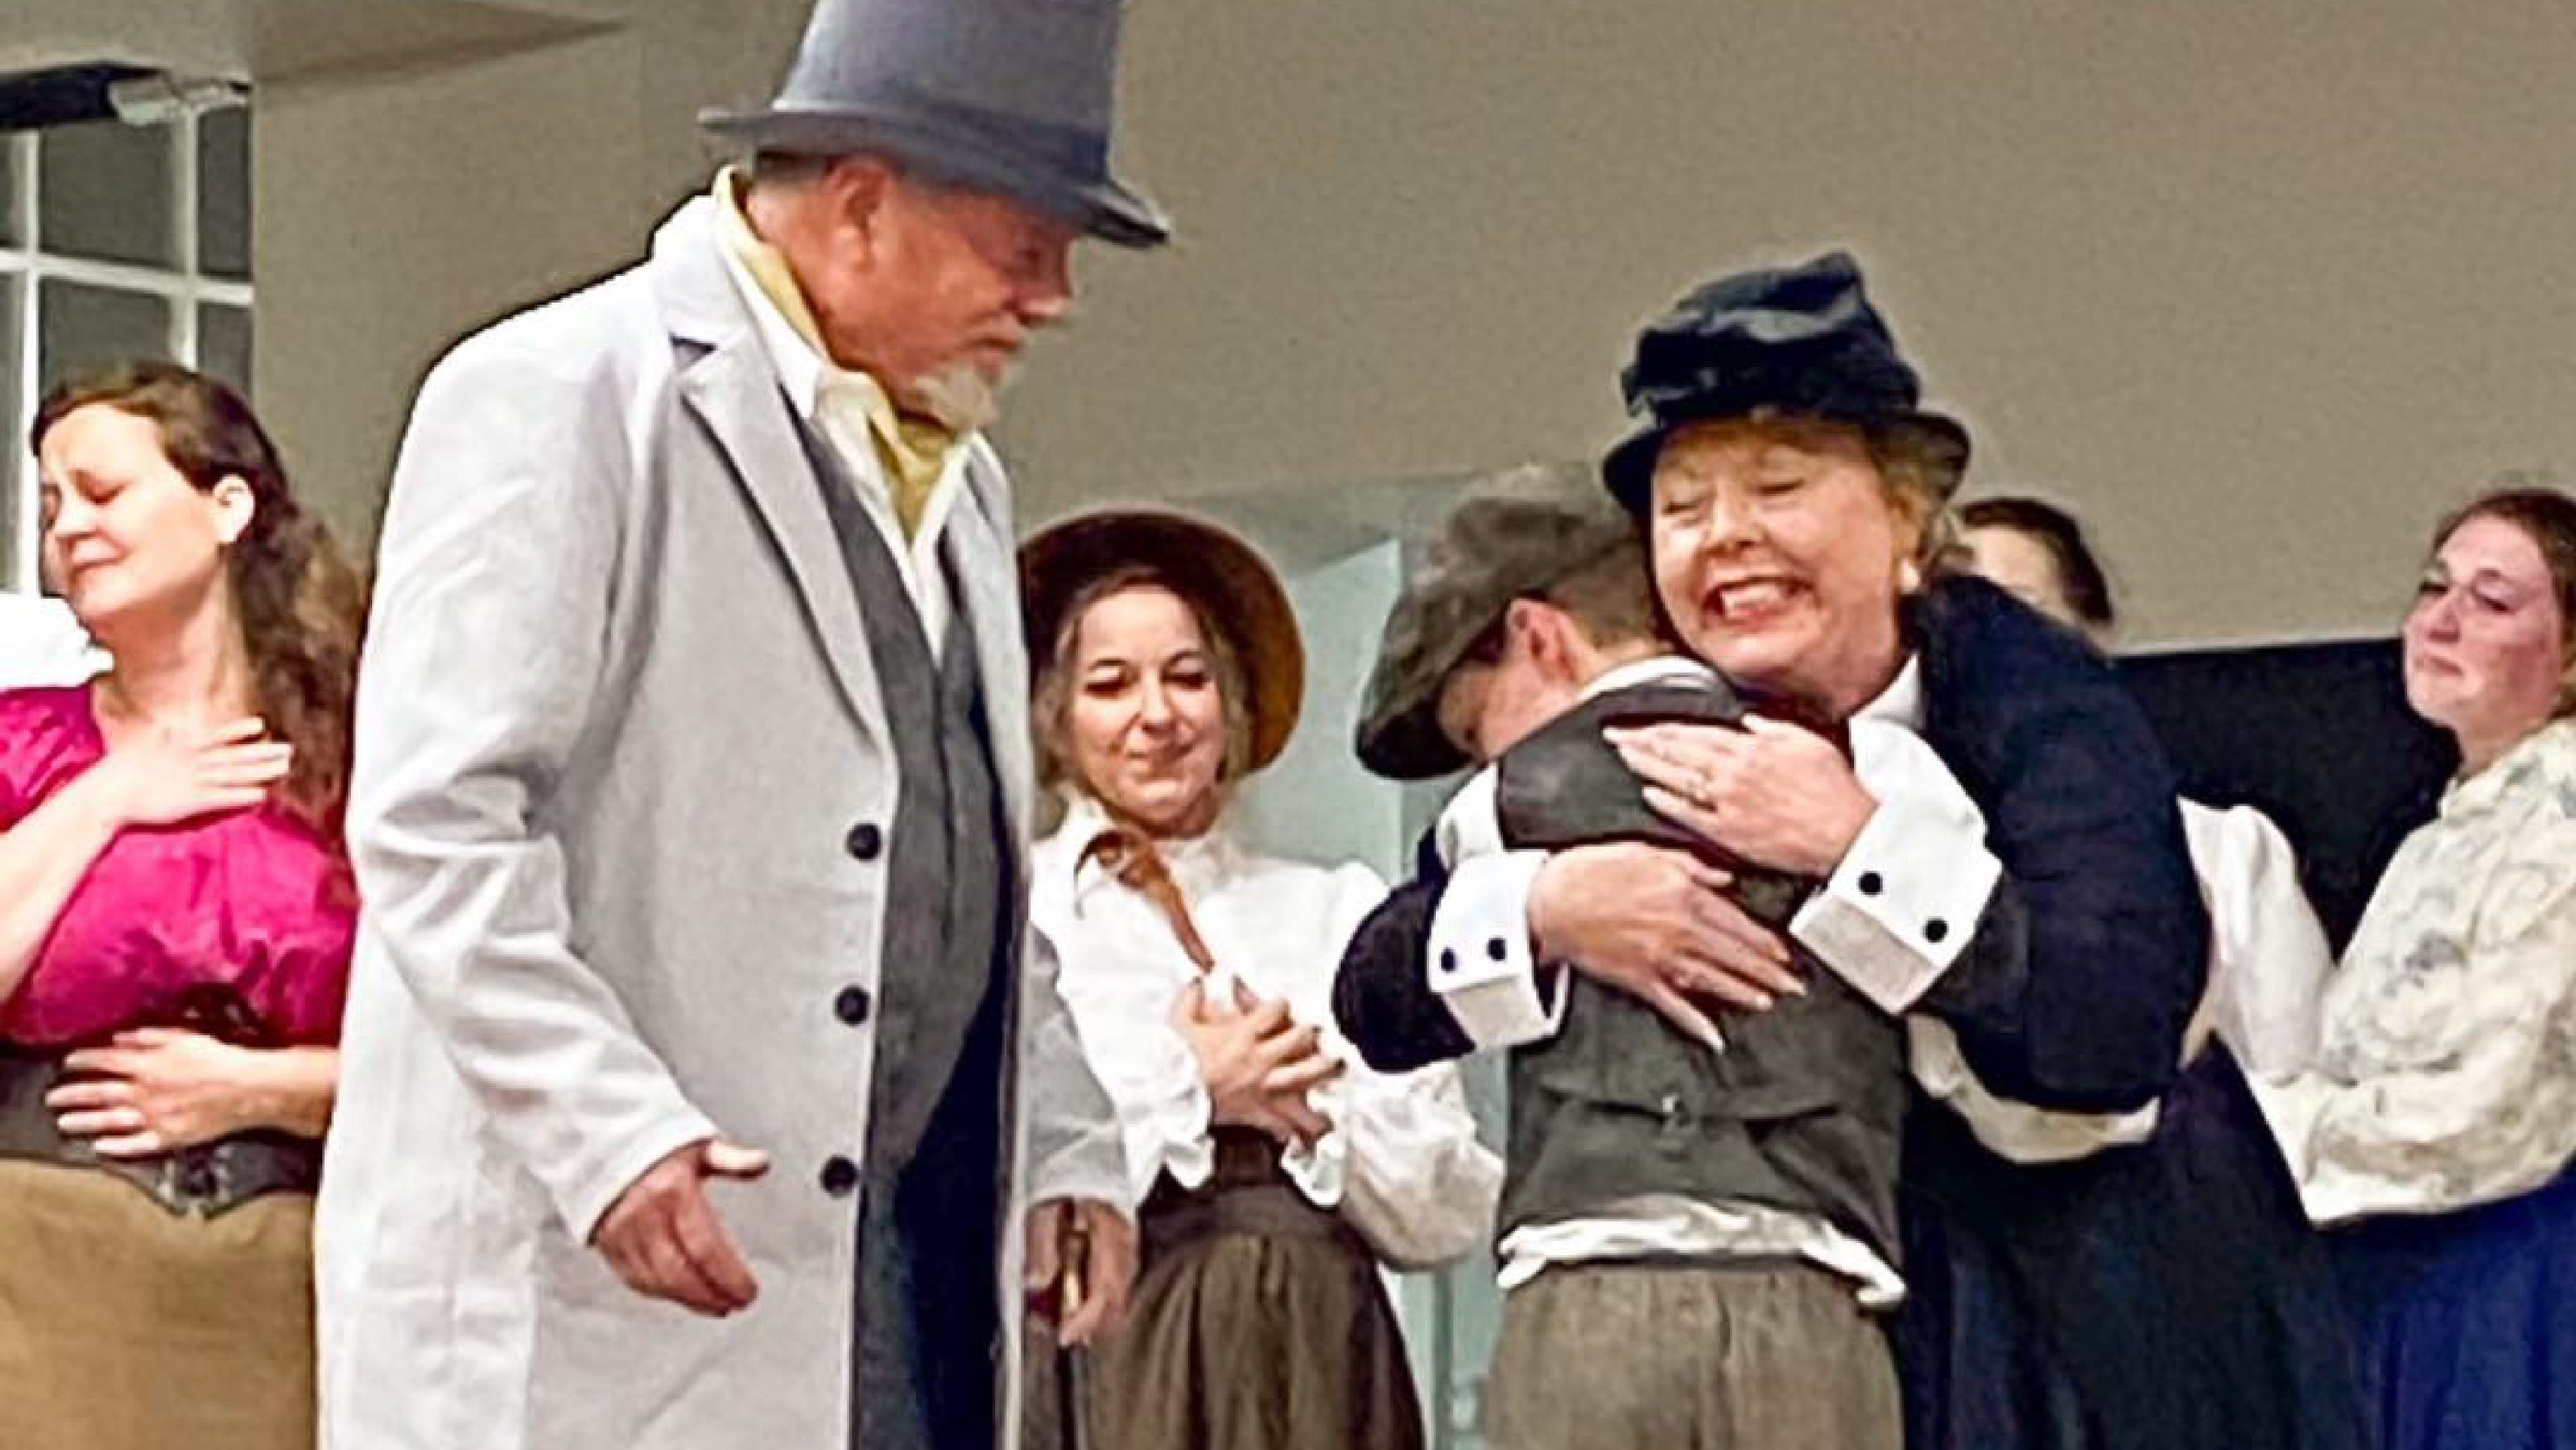 Oliver! presented through May 8 by Pike Road Theatre Company